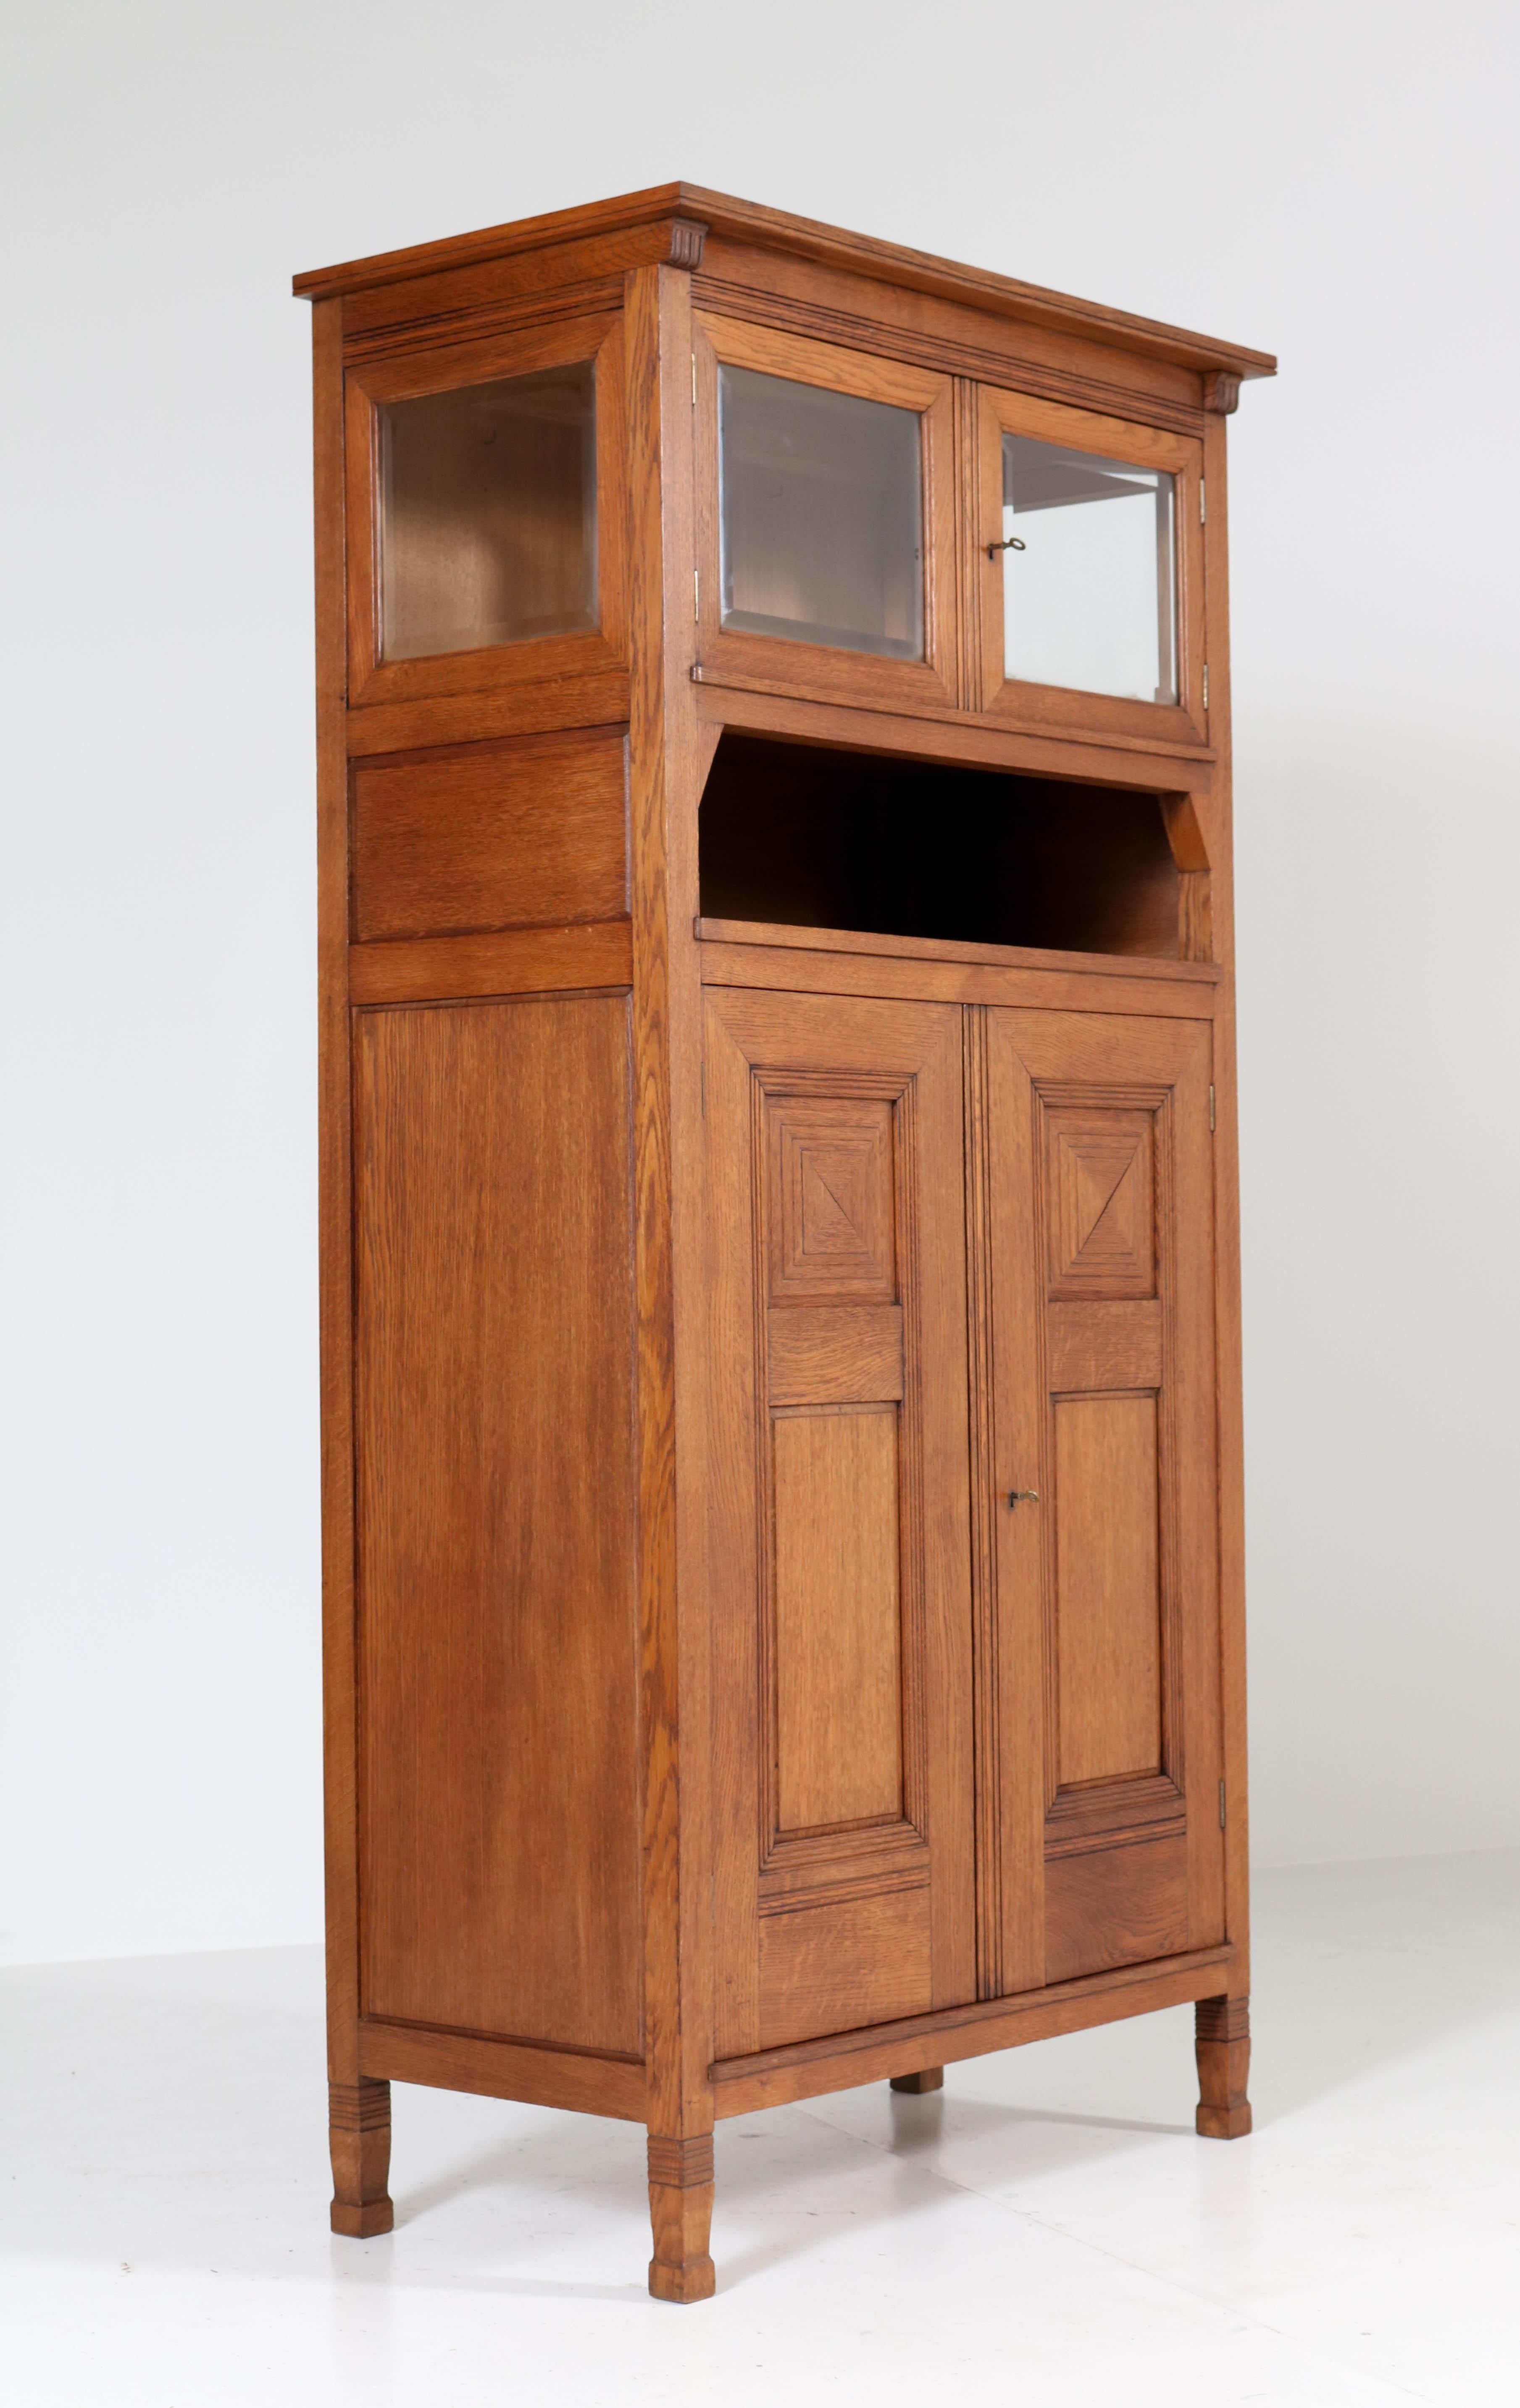 Glass Oak Art Nouveau Arts & Crafts Bookcase by A.R. Wittop Koning for J.A. Huizinga